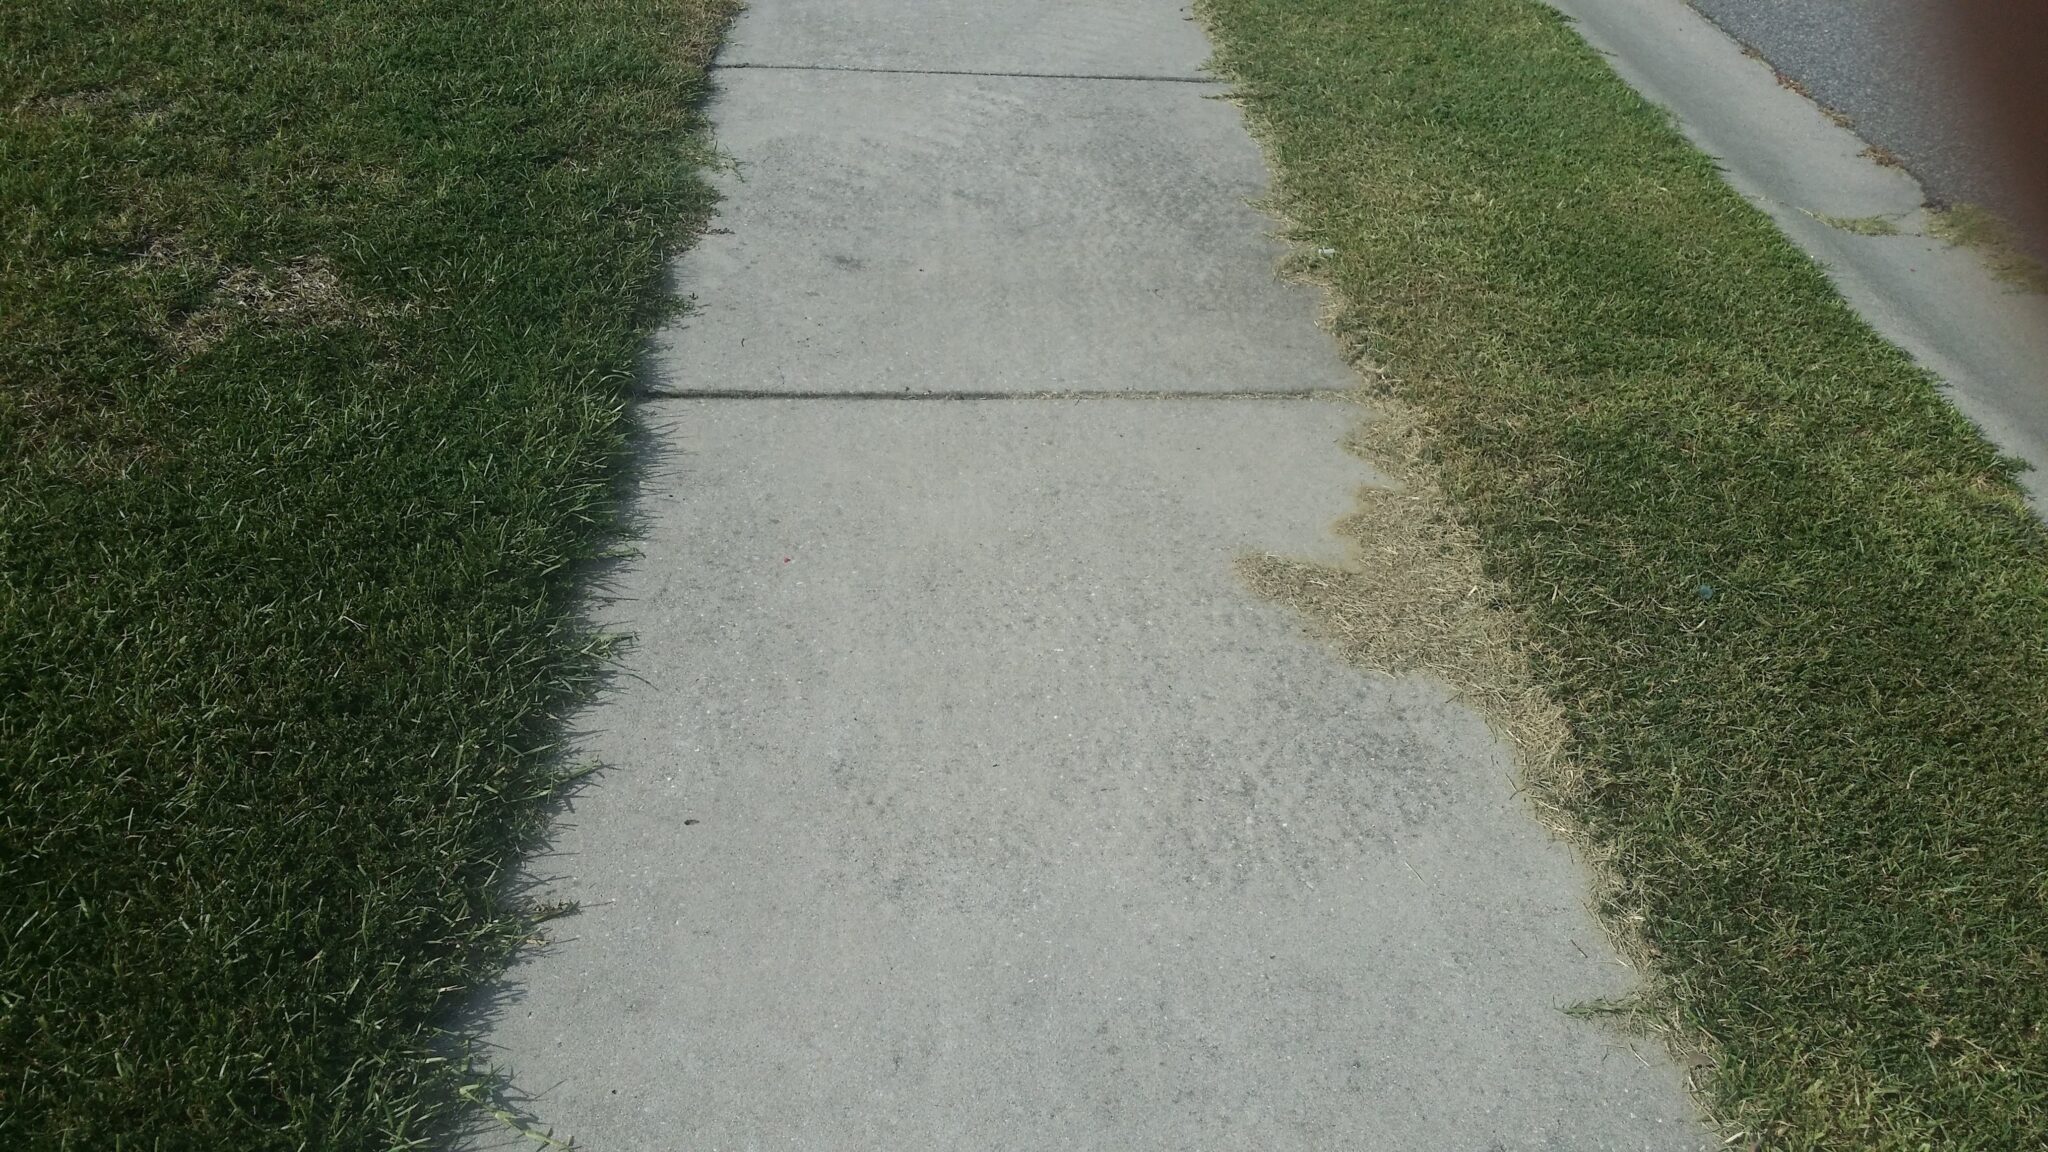 Sidewalk located in a nearby Goose Creek subdivision.